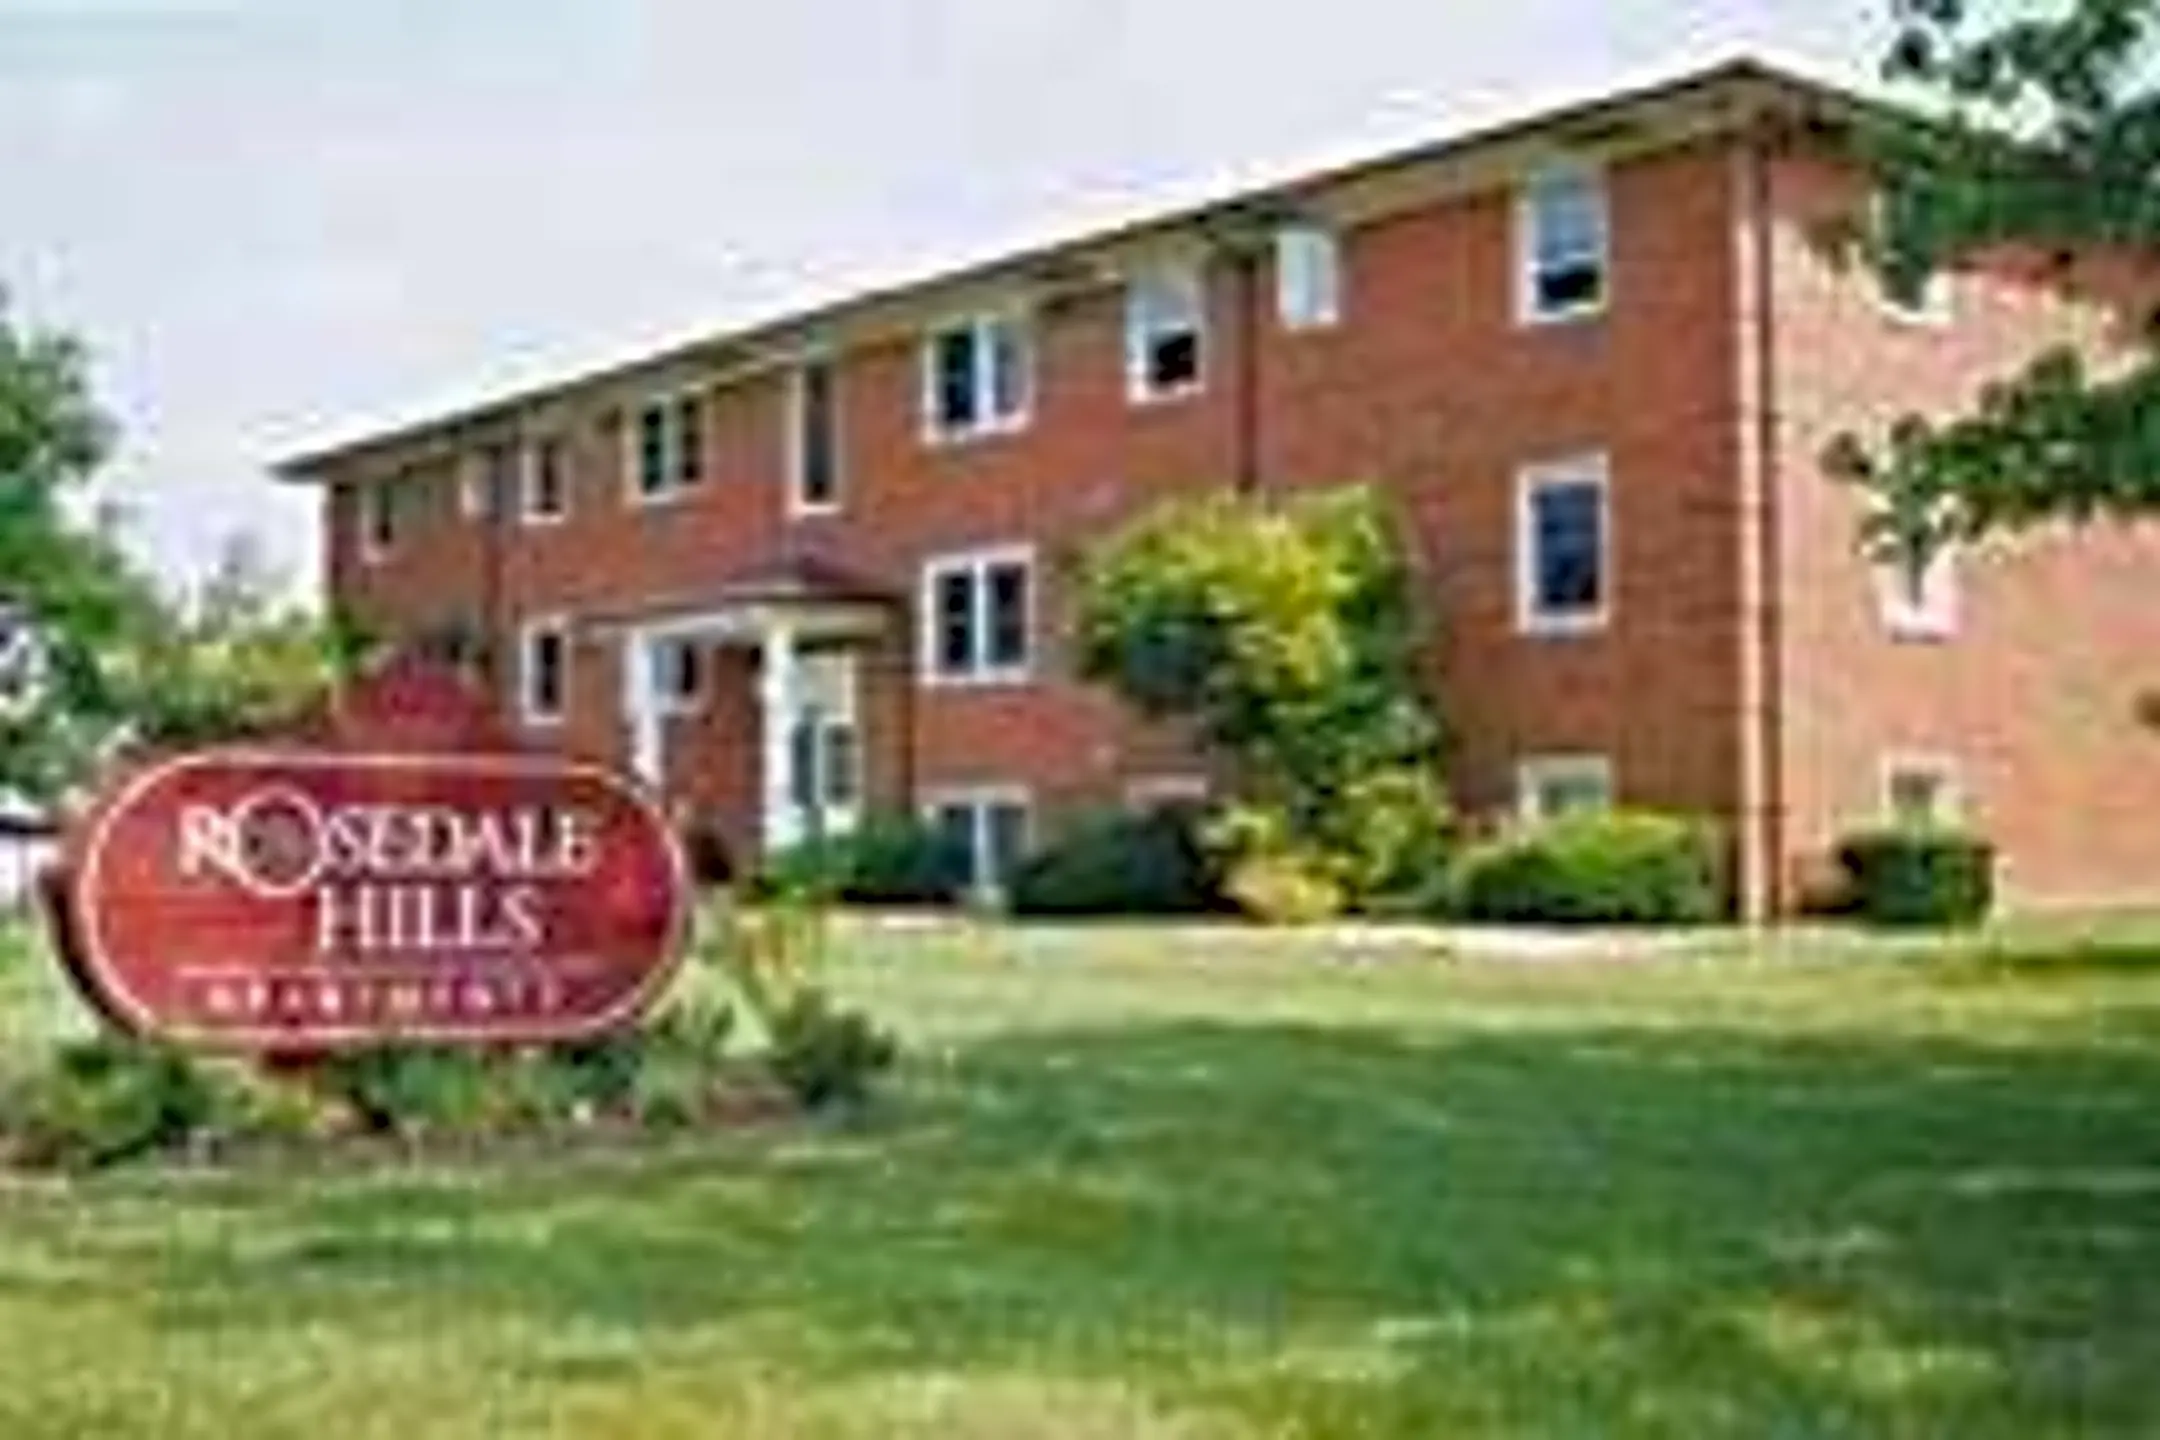 Community Signage - Rosedale Hills Apartments - Indianapolis, IN